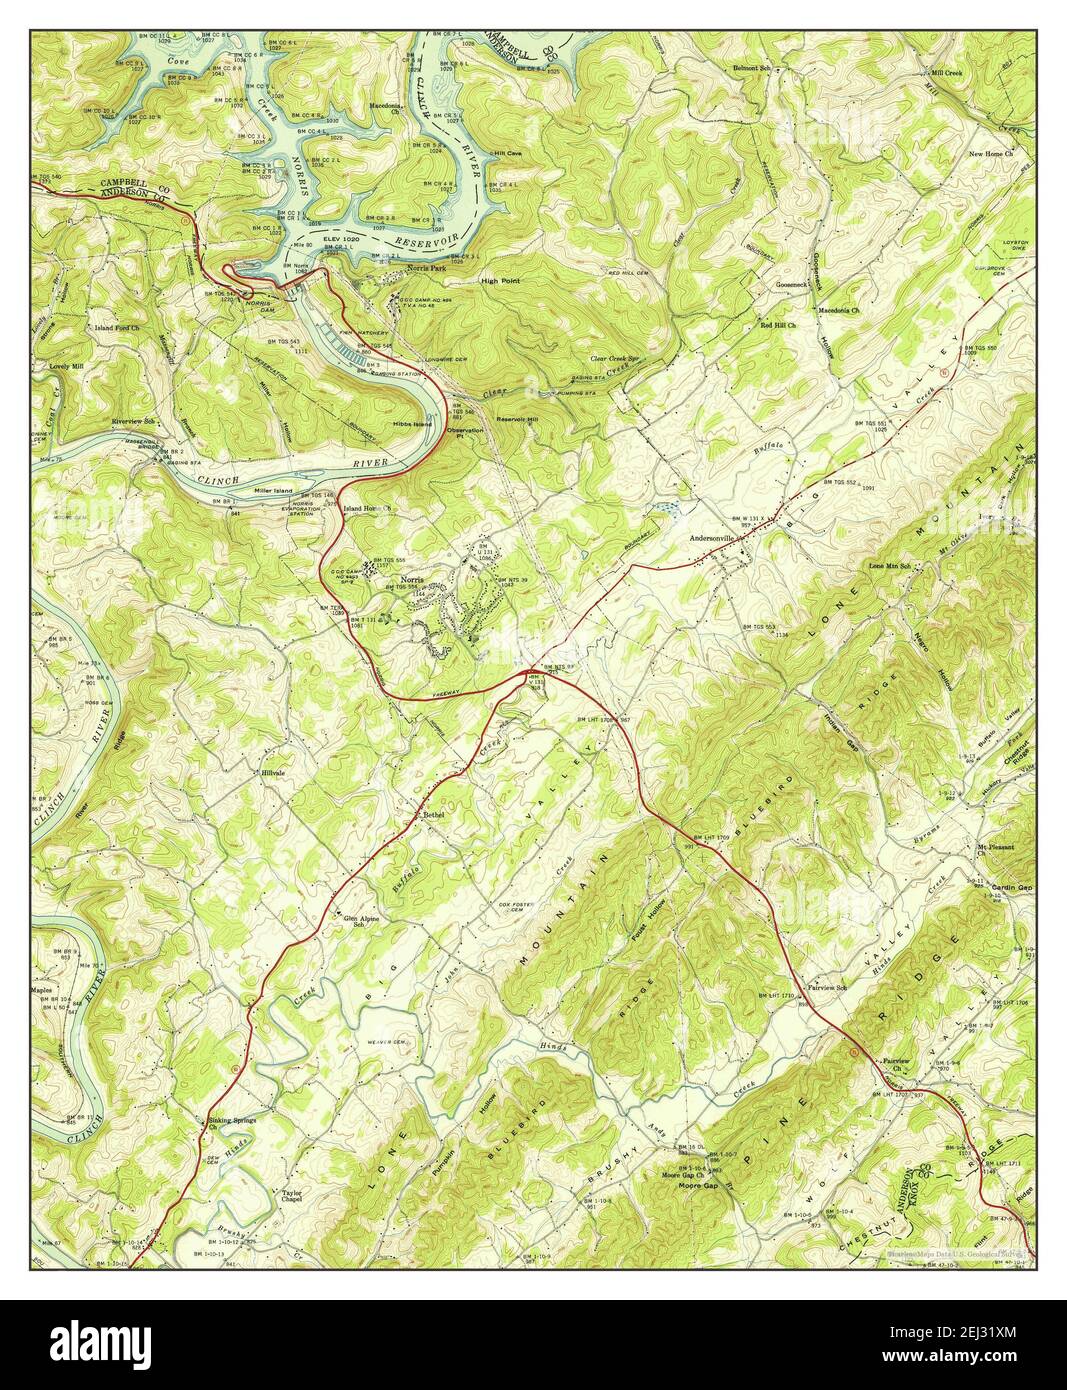 Norris, Tennessee, map 1941, 1:24000, United States of America by Timeless Maps, data U.S. Geological Survey Stock Photo